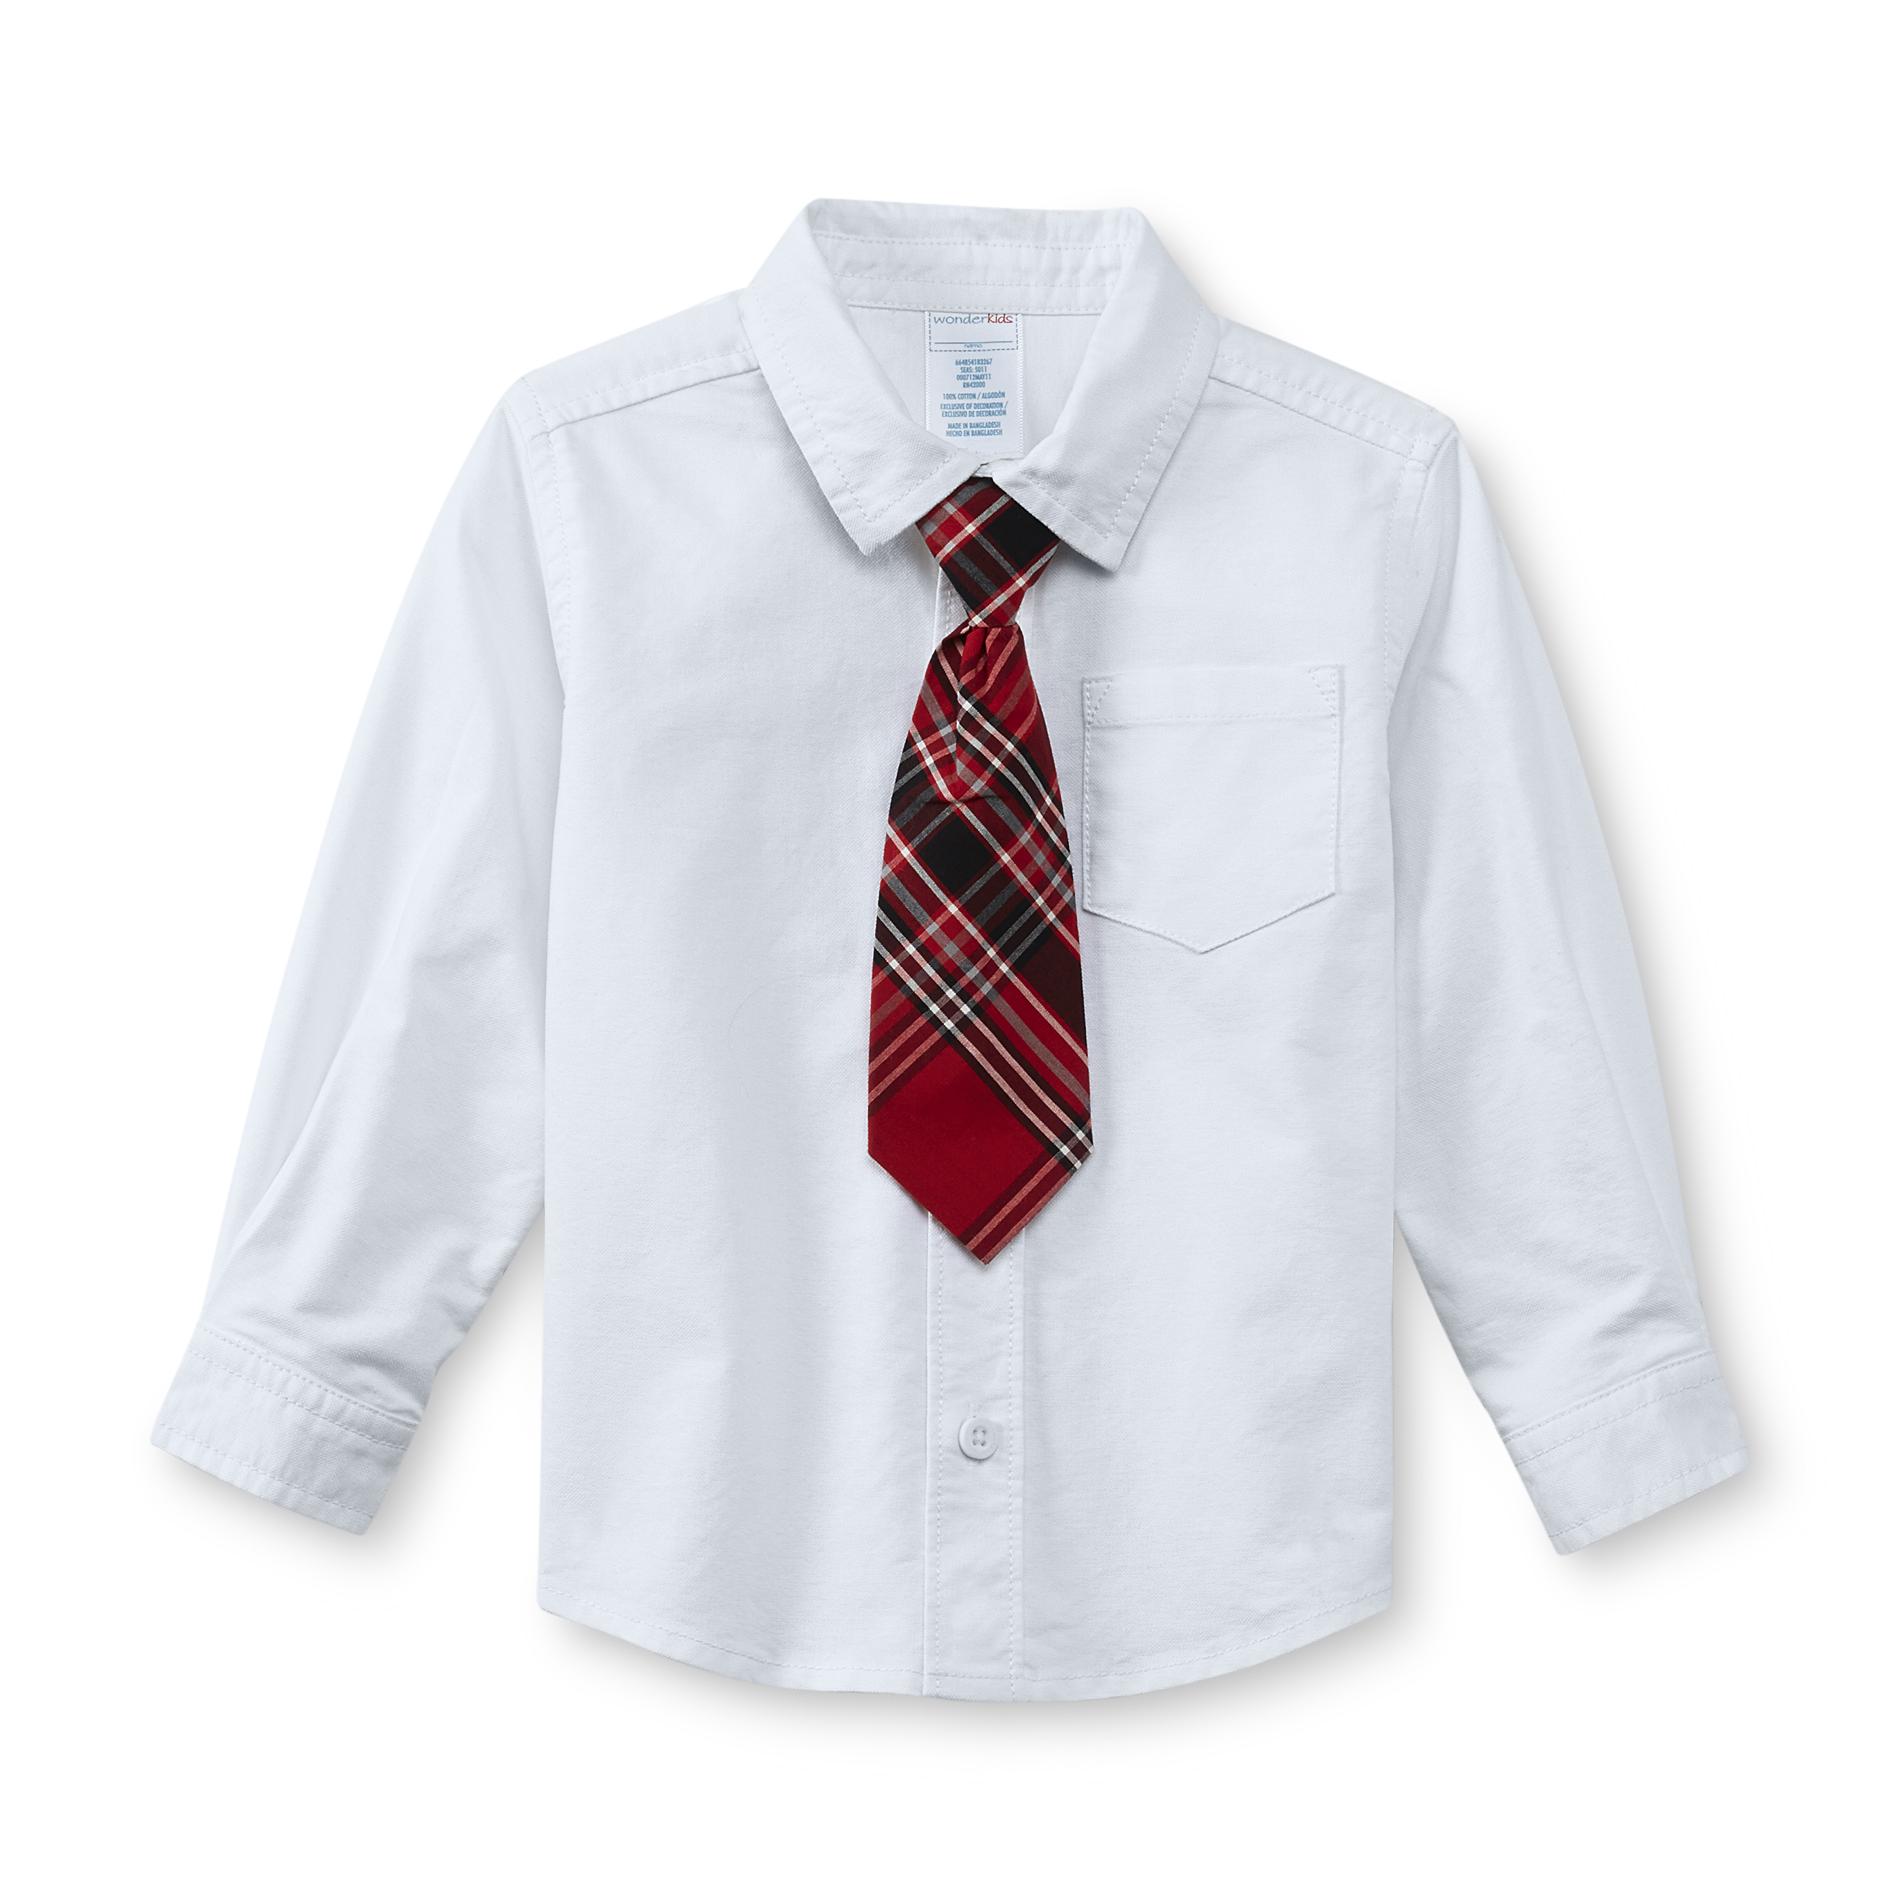 Holiday Editions Infant & Toddler Boy's Dress Shirt & Tie - Plaid